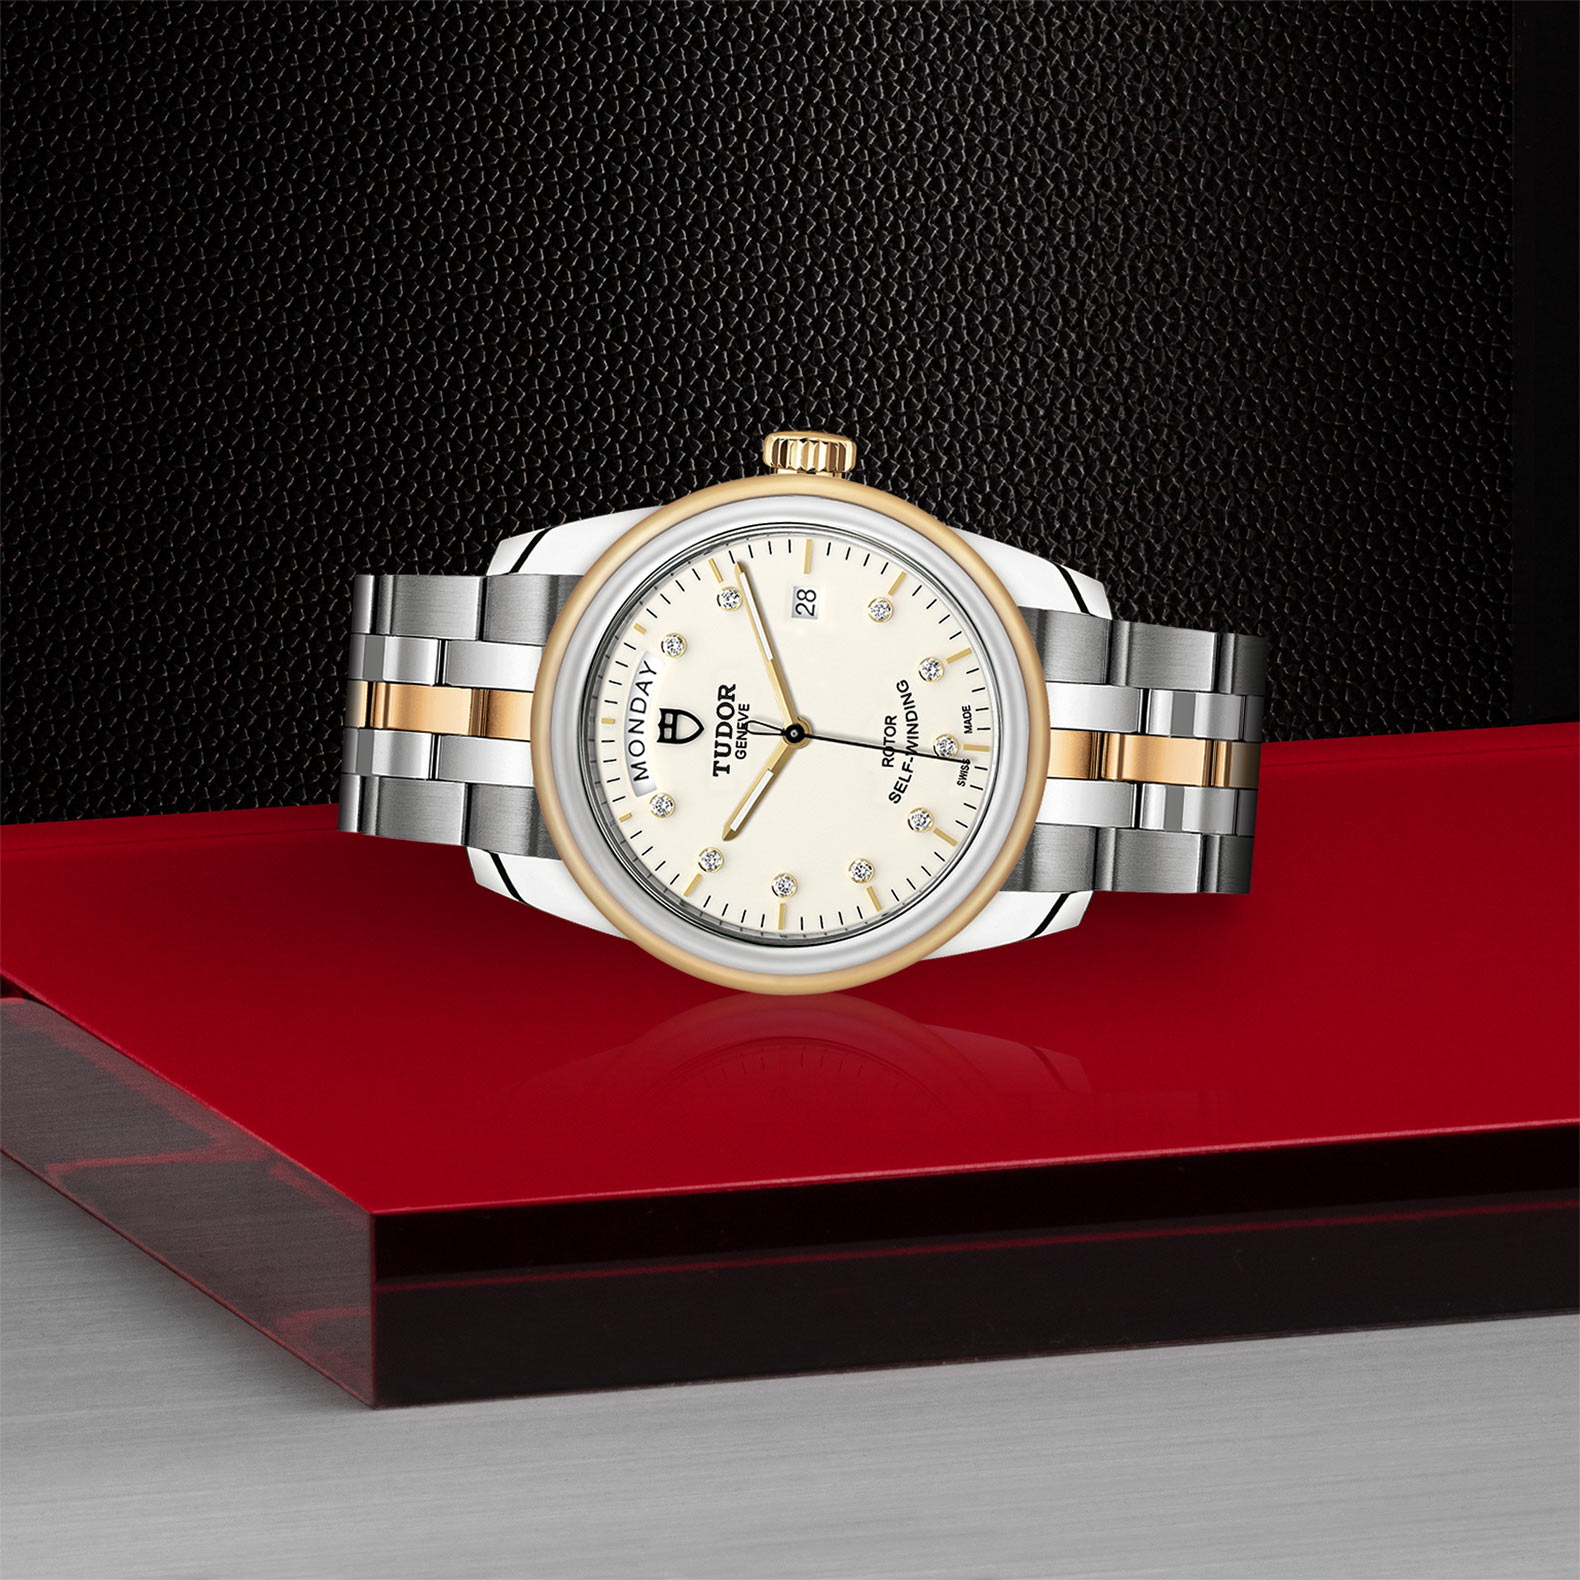 TUDOR Glamour Date+Day - M56003-0113